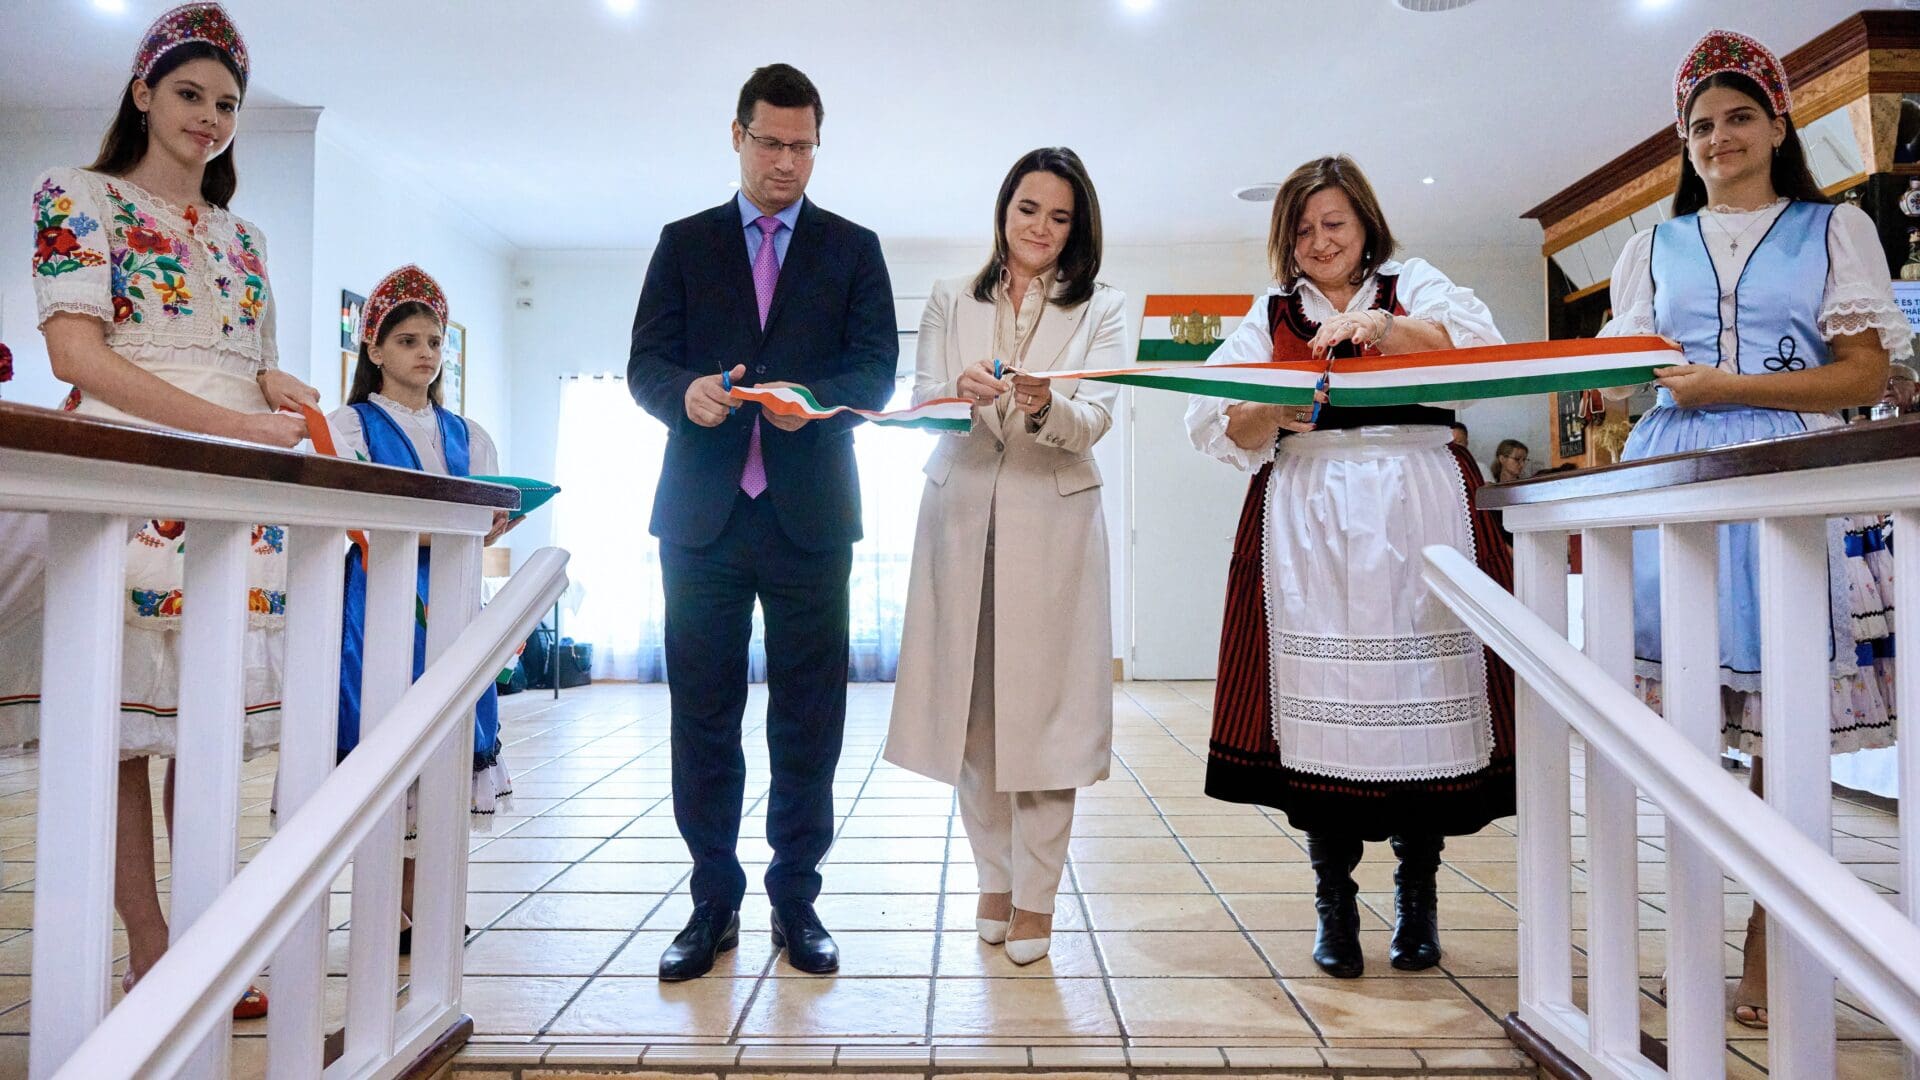 Gergely Gulyás and President Katalin Novák cutting the ribbon at the inauguration ceremony in Marsden, Australia on 29 October 2023.